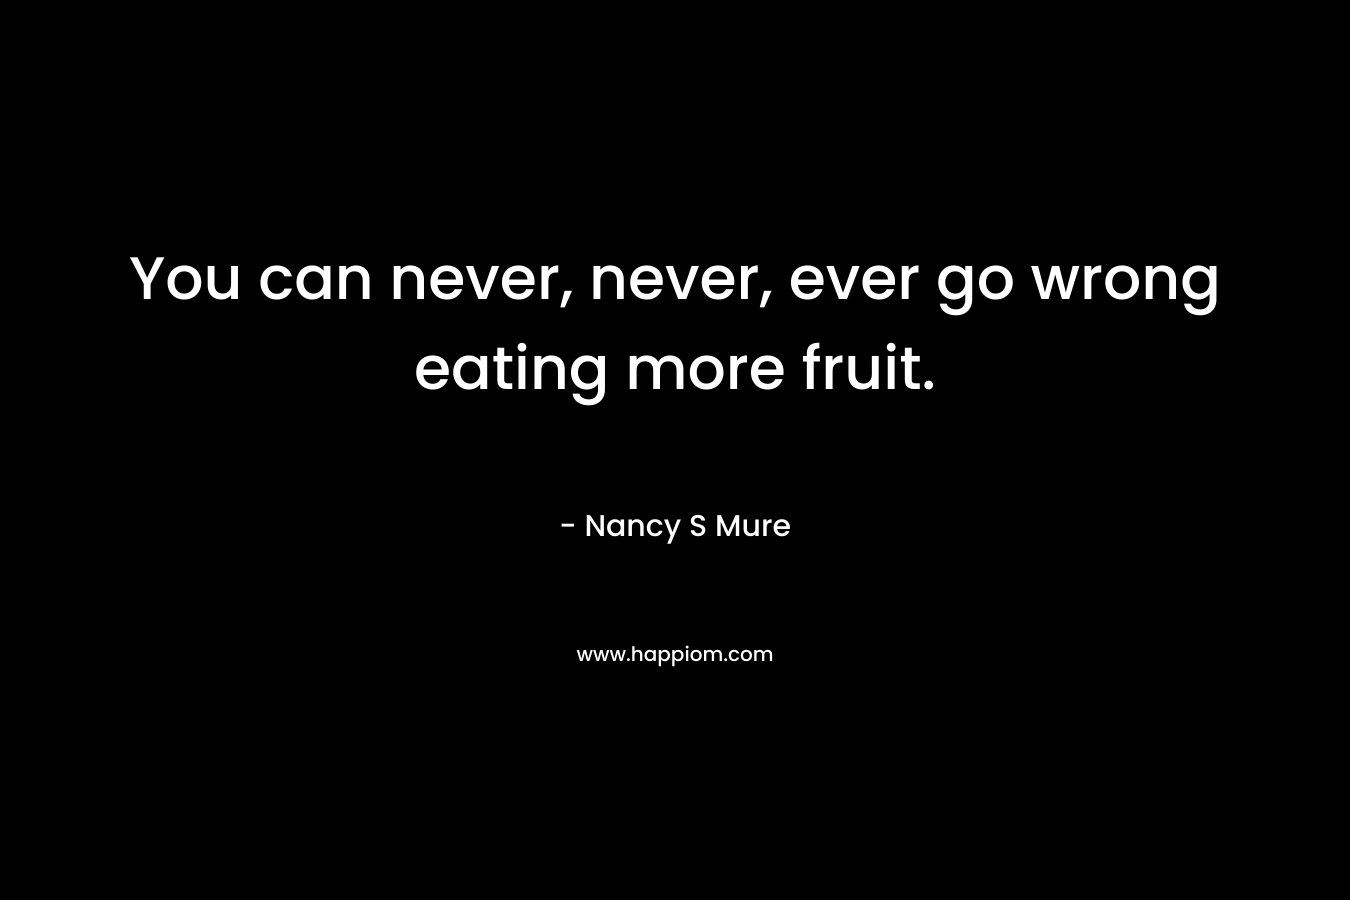 You can never, never, ever go wrong eating more fruit. – Nancy S Mure